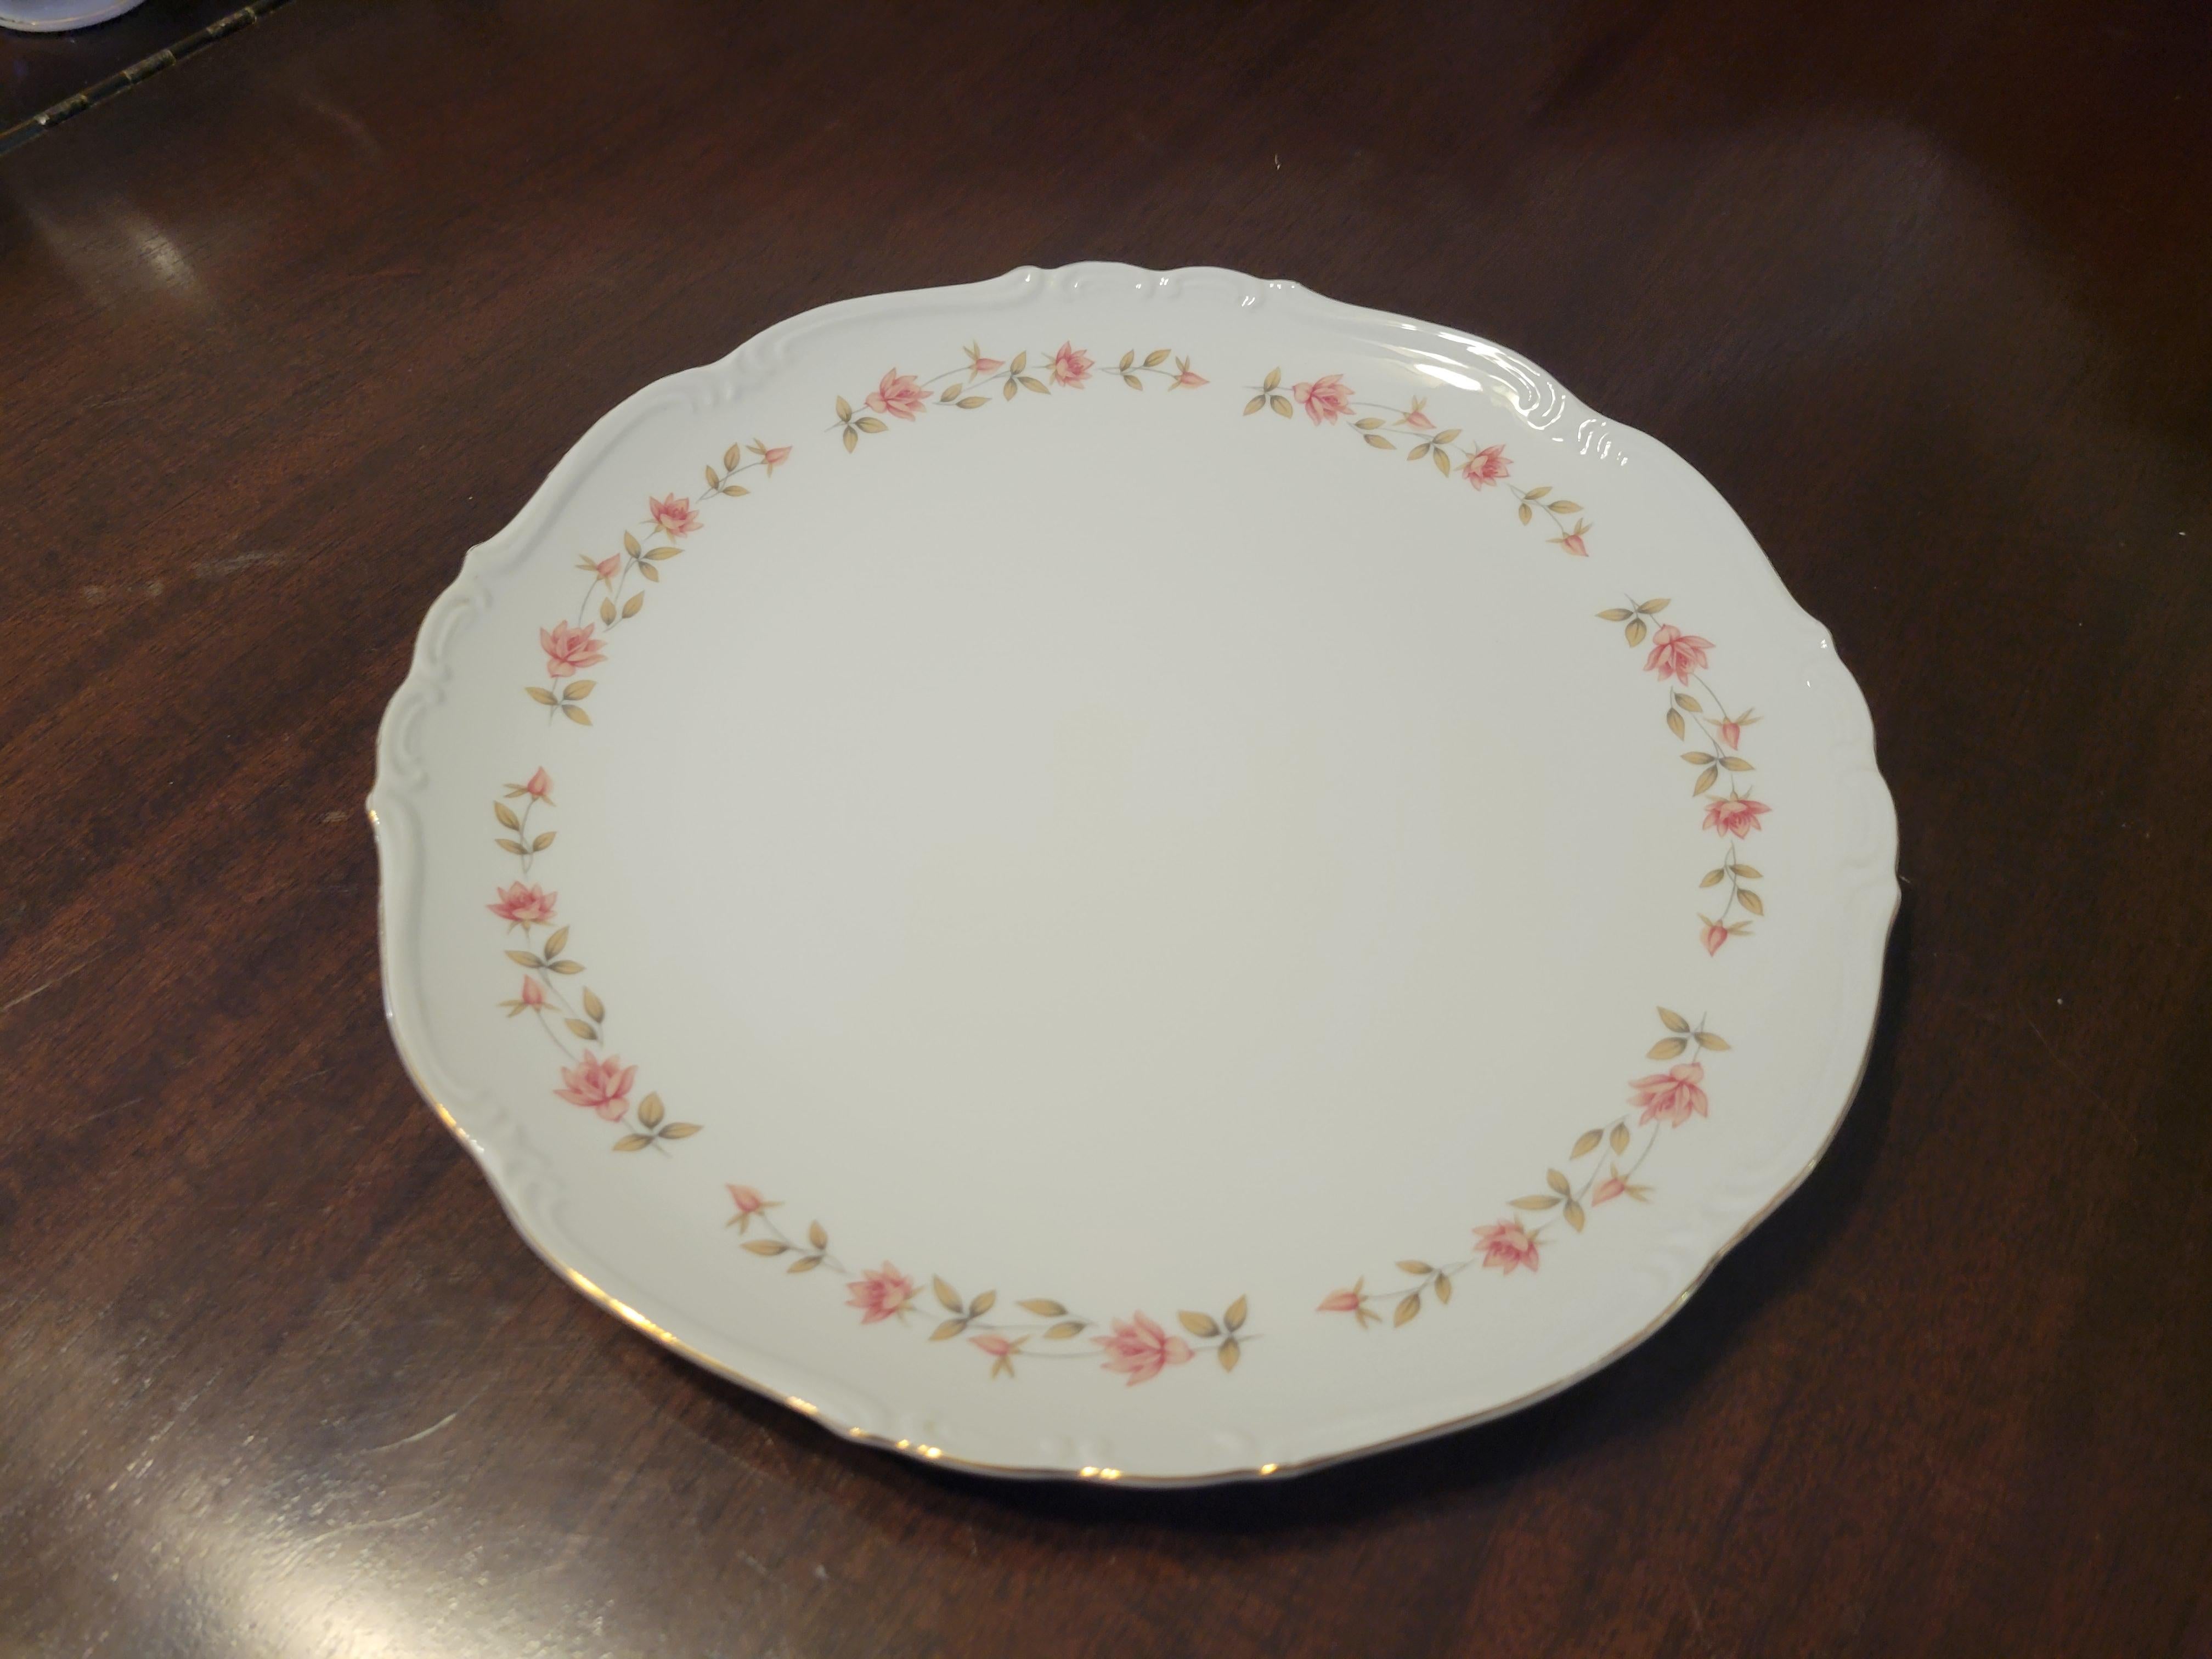 1950, Eternal Rose (Japan) Fine China 8-Person Dining Set - 44 pieces For Sale 9